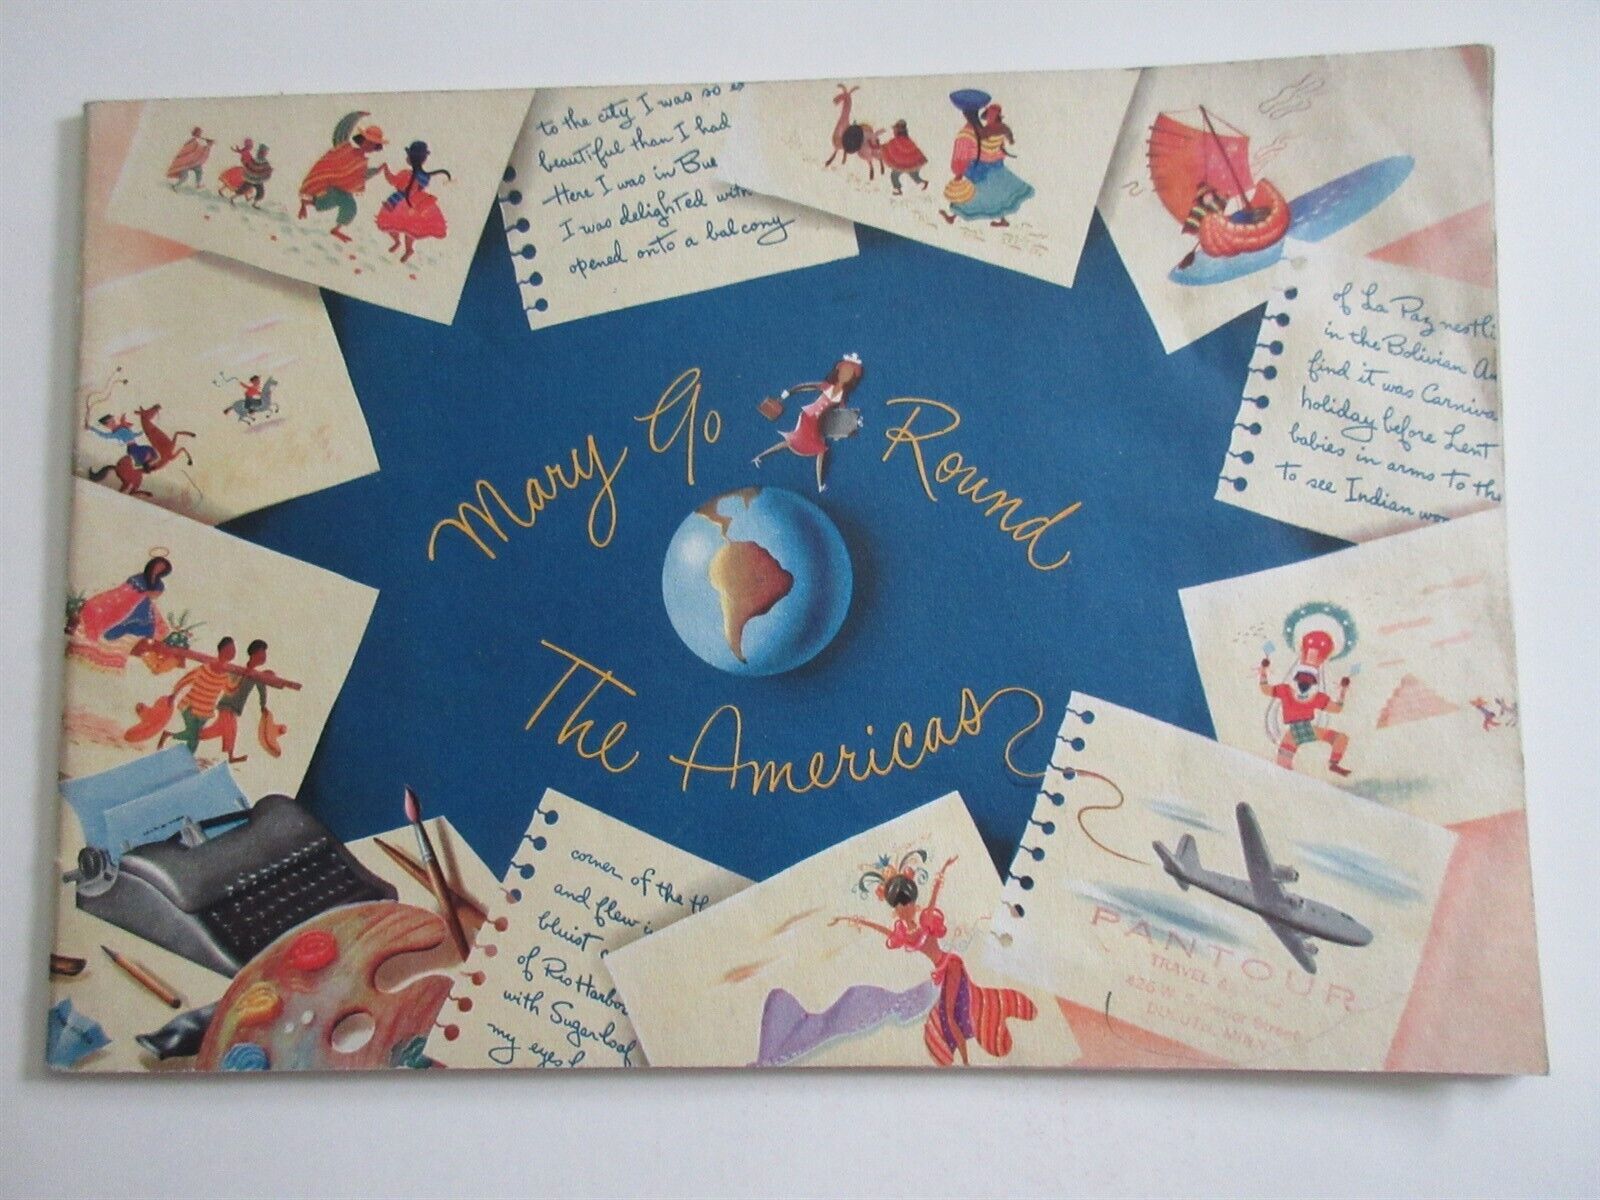 1947 Panagra Pan American Grace Airways Mary Go Round The Americas booklet